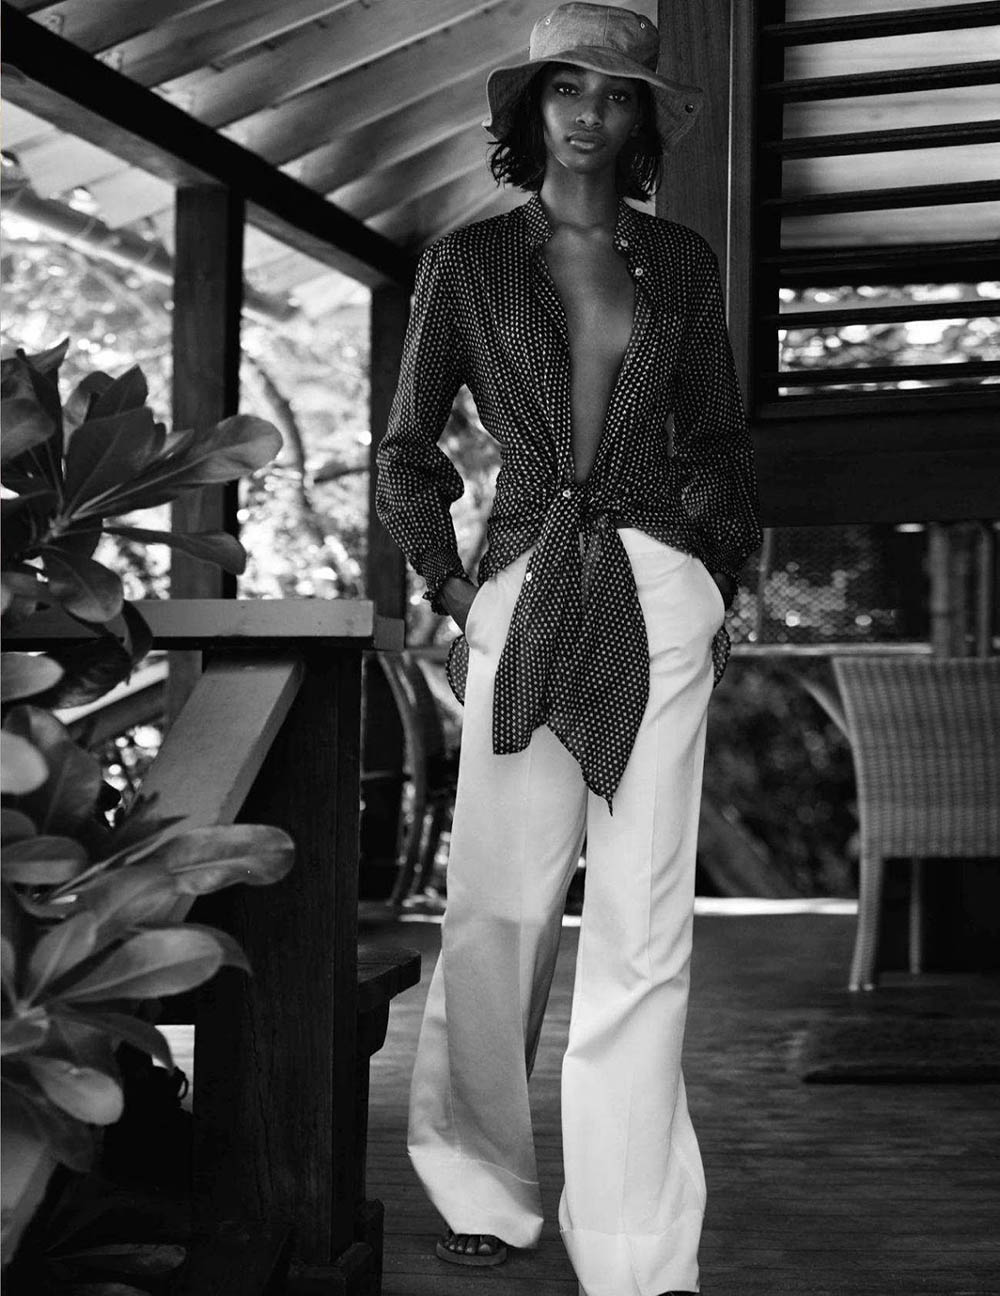 Naomi Chin Wing by Txema Yeste for Vogue Spain August 2018